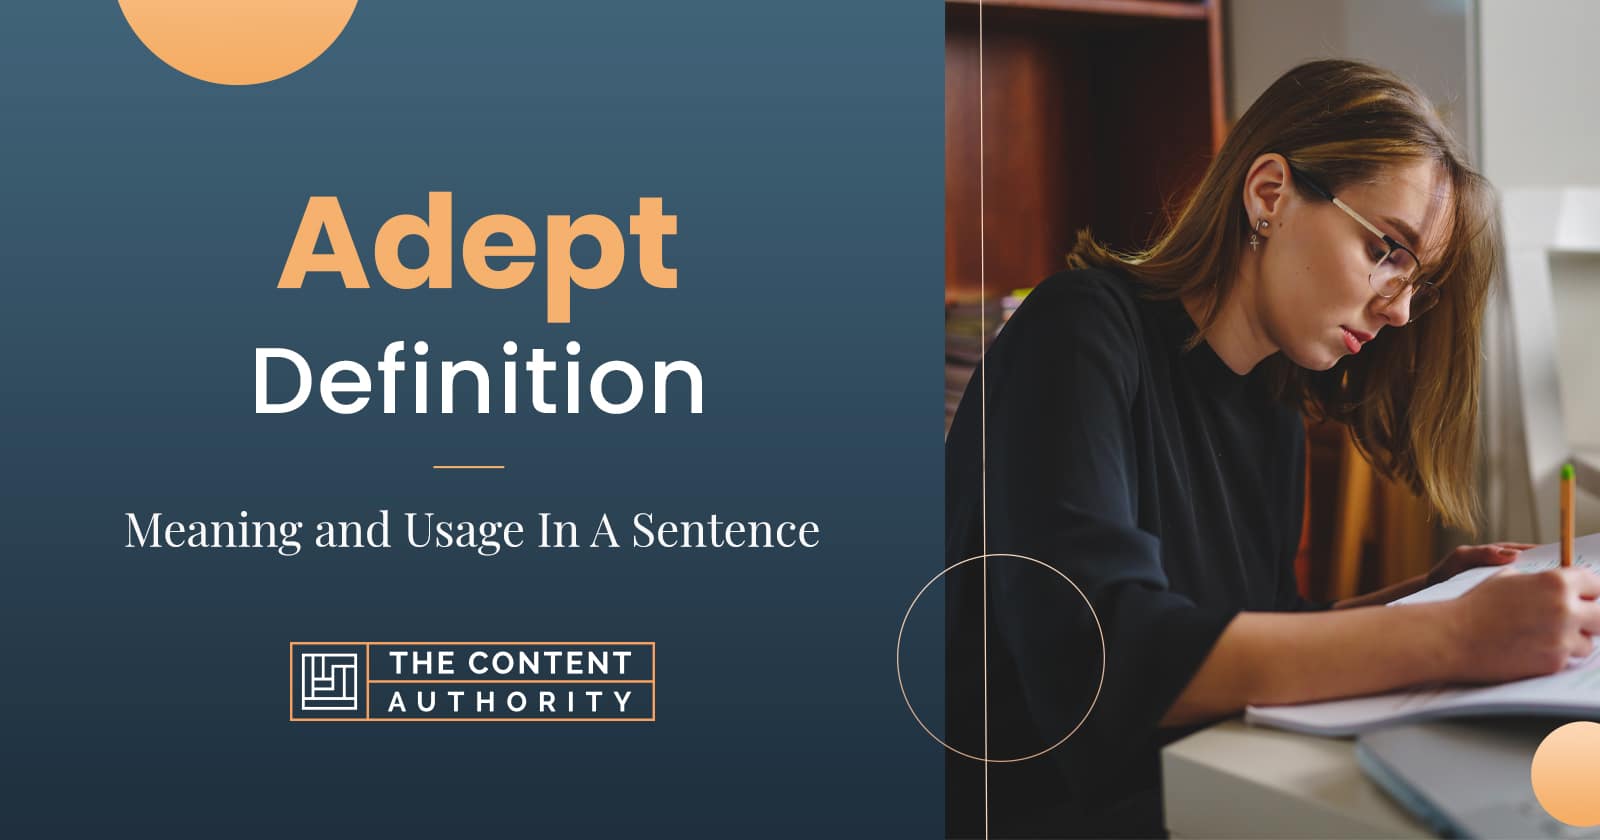 Adept Definition Meaning And Usage In A Sentence